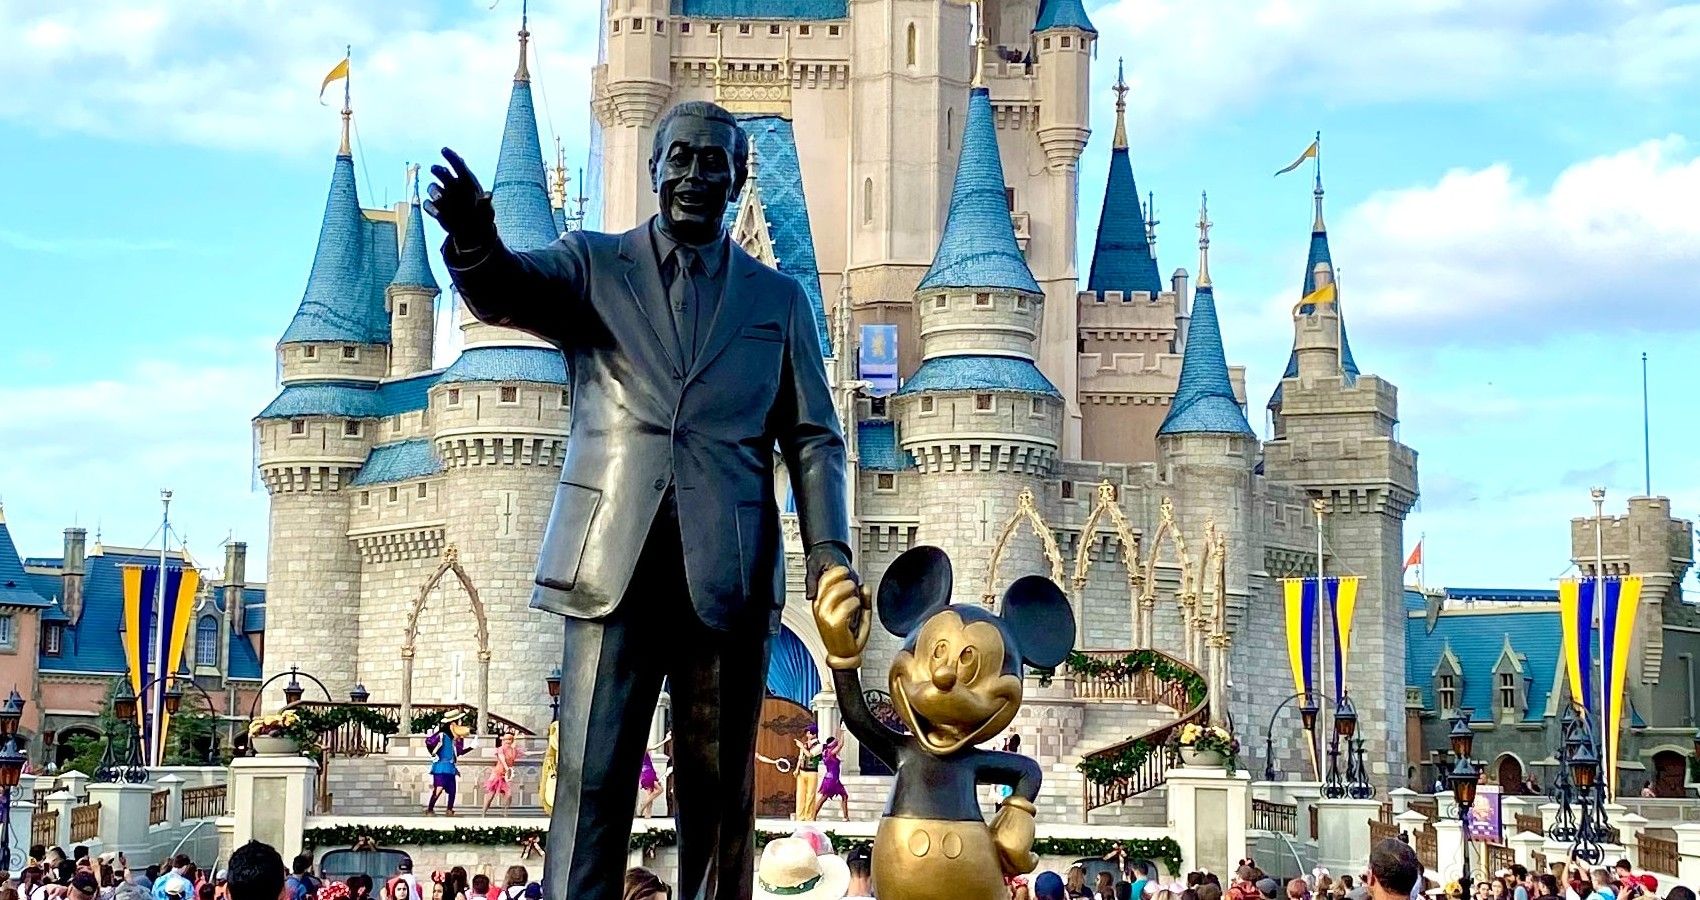 A Statue Of Walt Disney And Mickey Mouse At Disney World